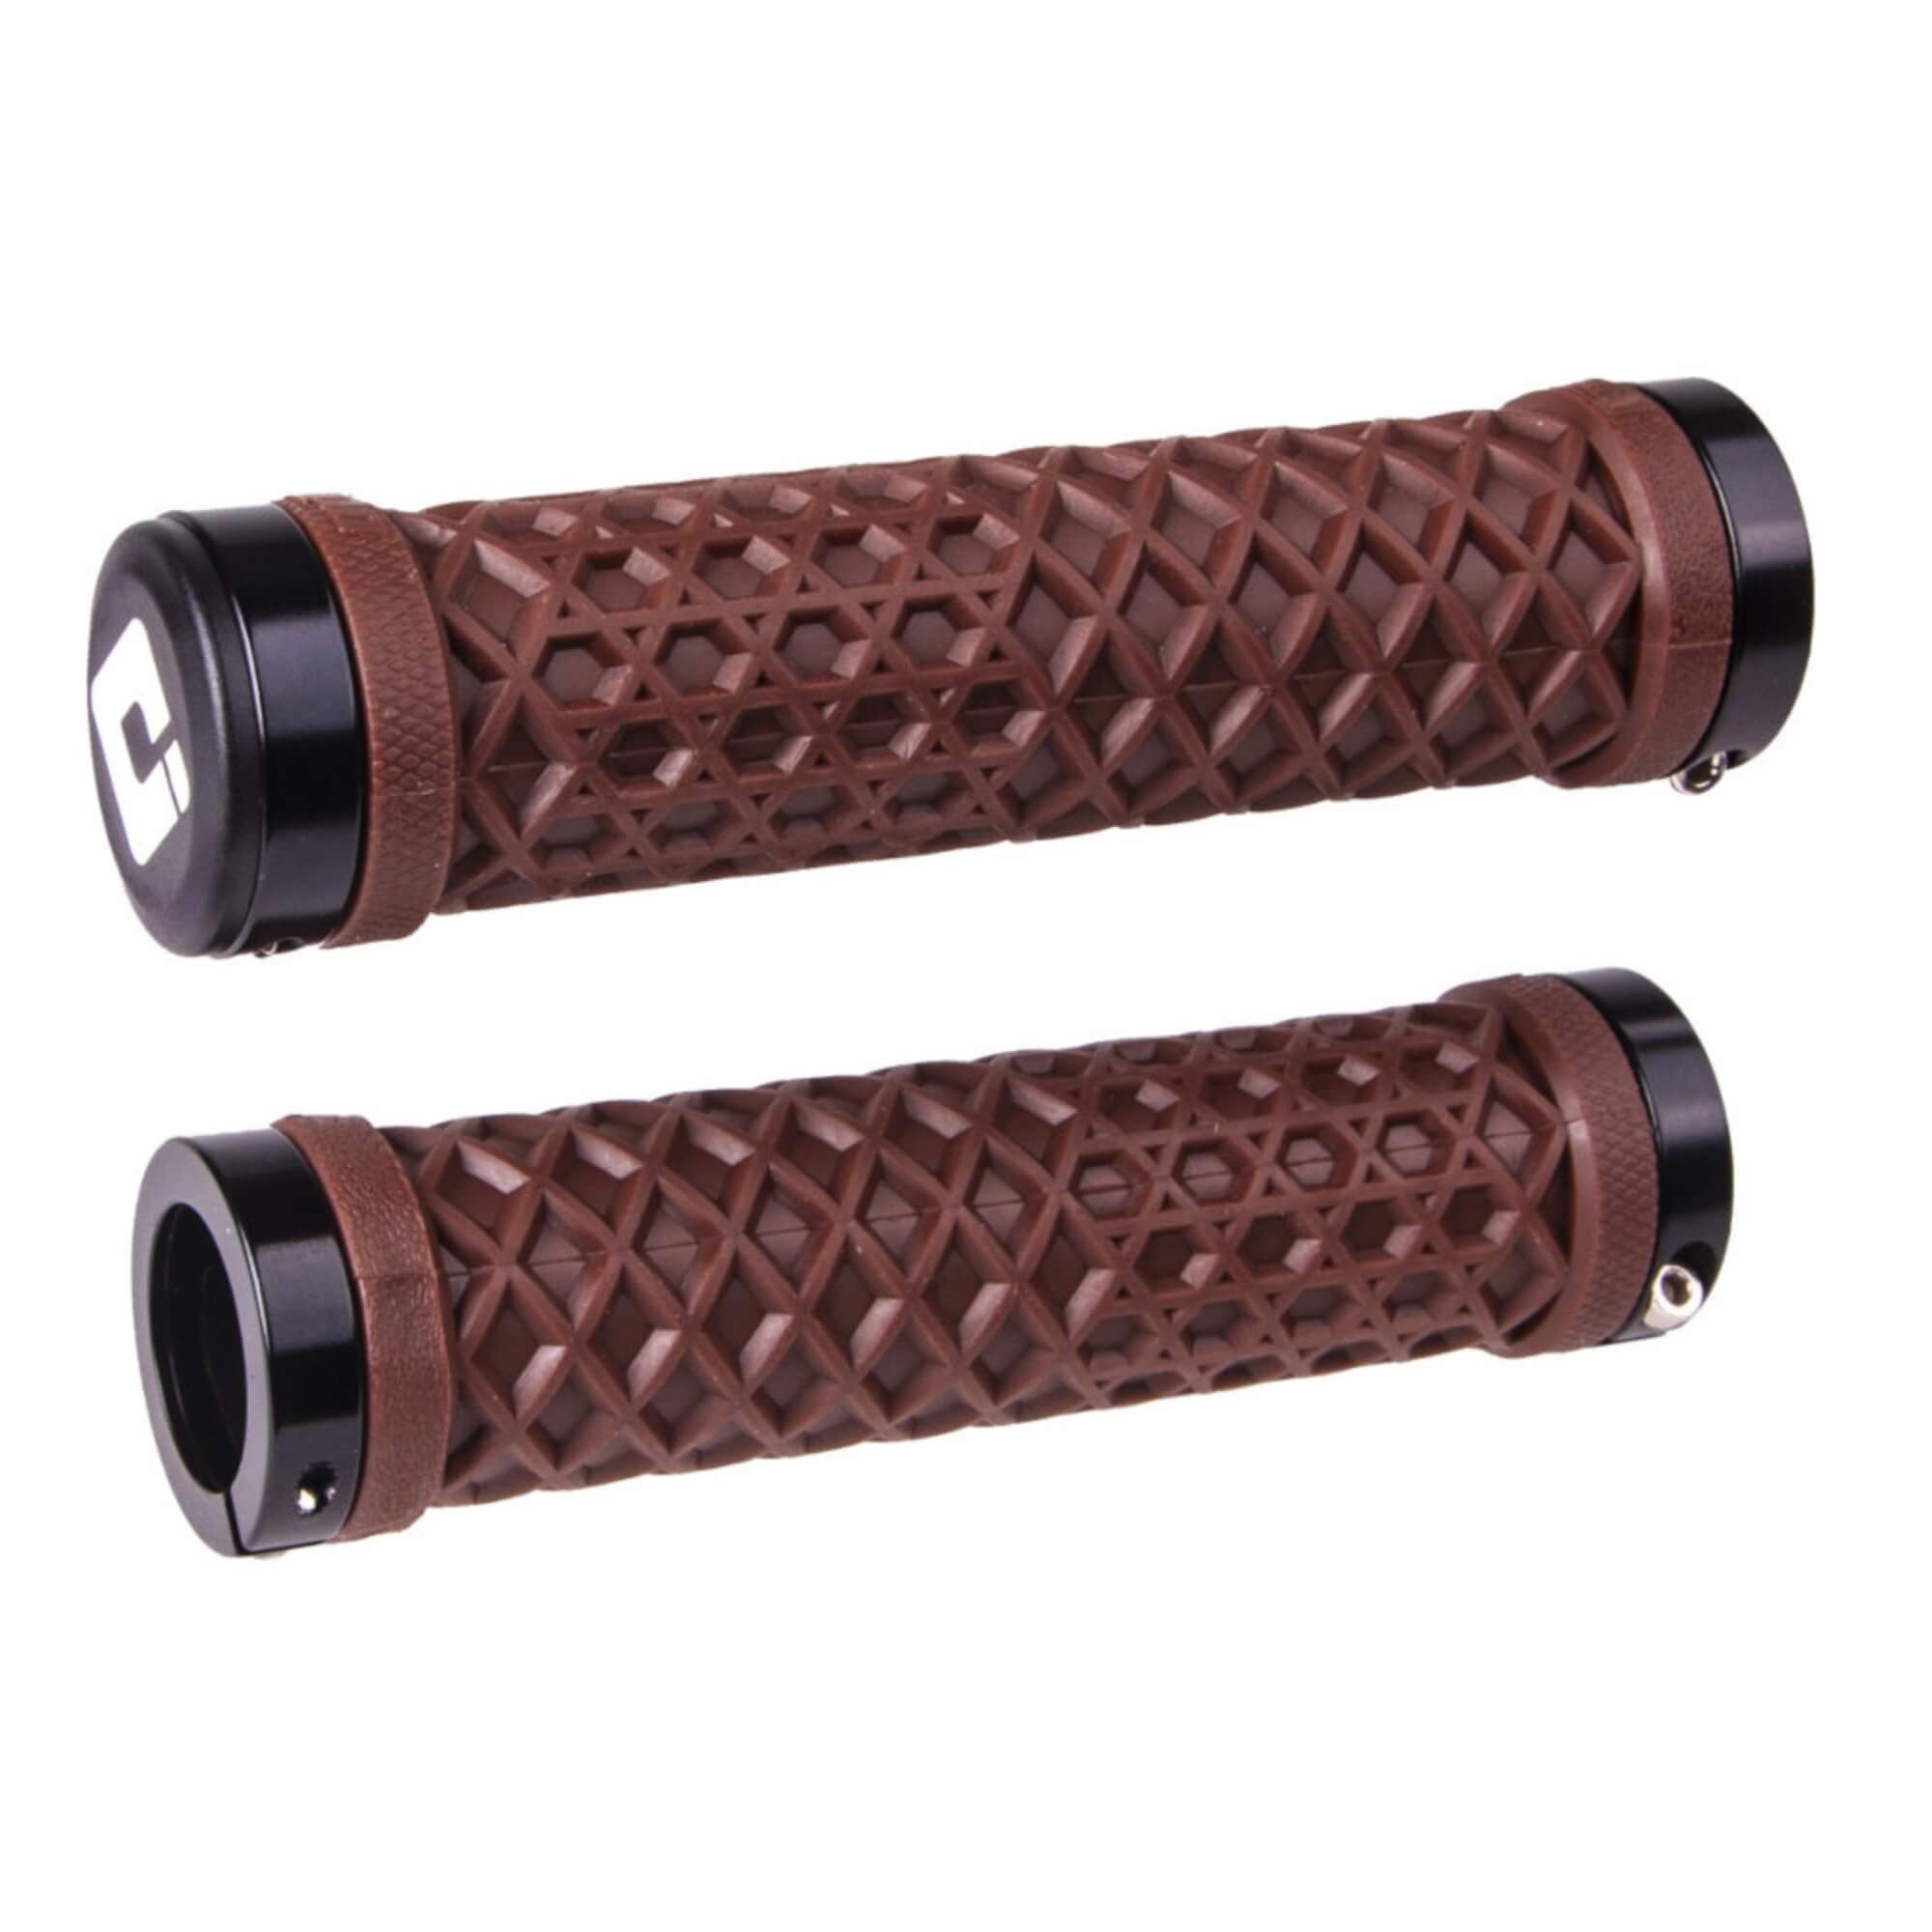 ODI Vans Lock-On Grips - Limited Edition